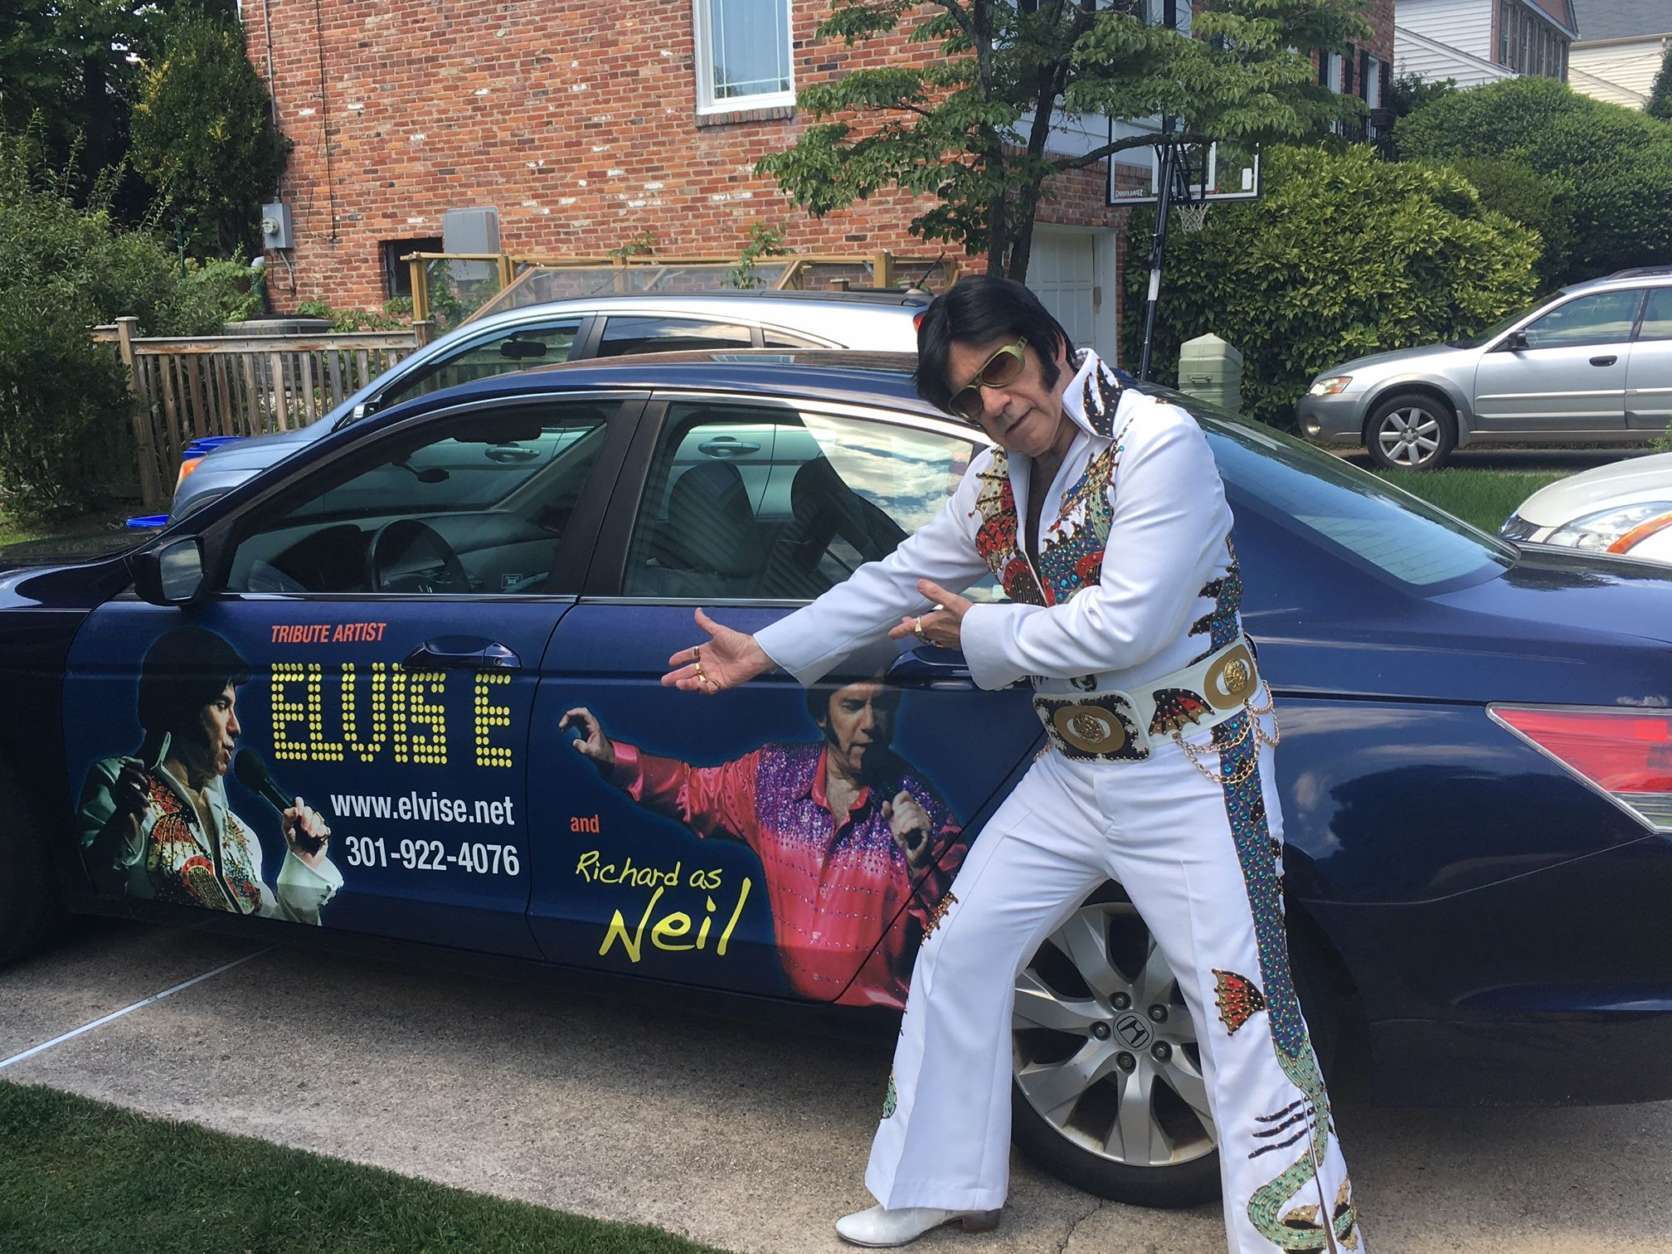 Elvis Presley tribute artist Elvis E with his customized car, in Potomac,. Maryland. (WTOP/Rick Massimo)